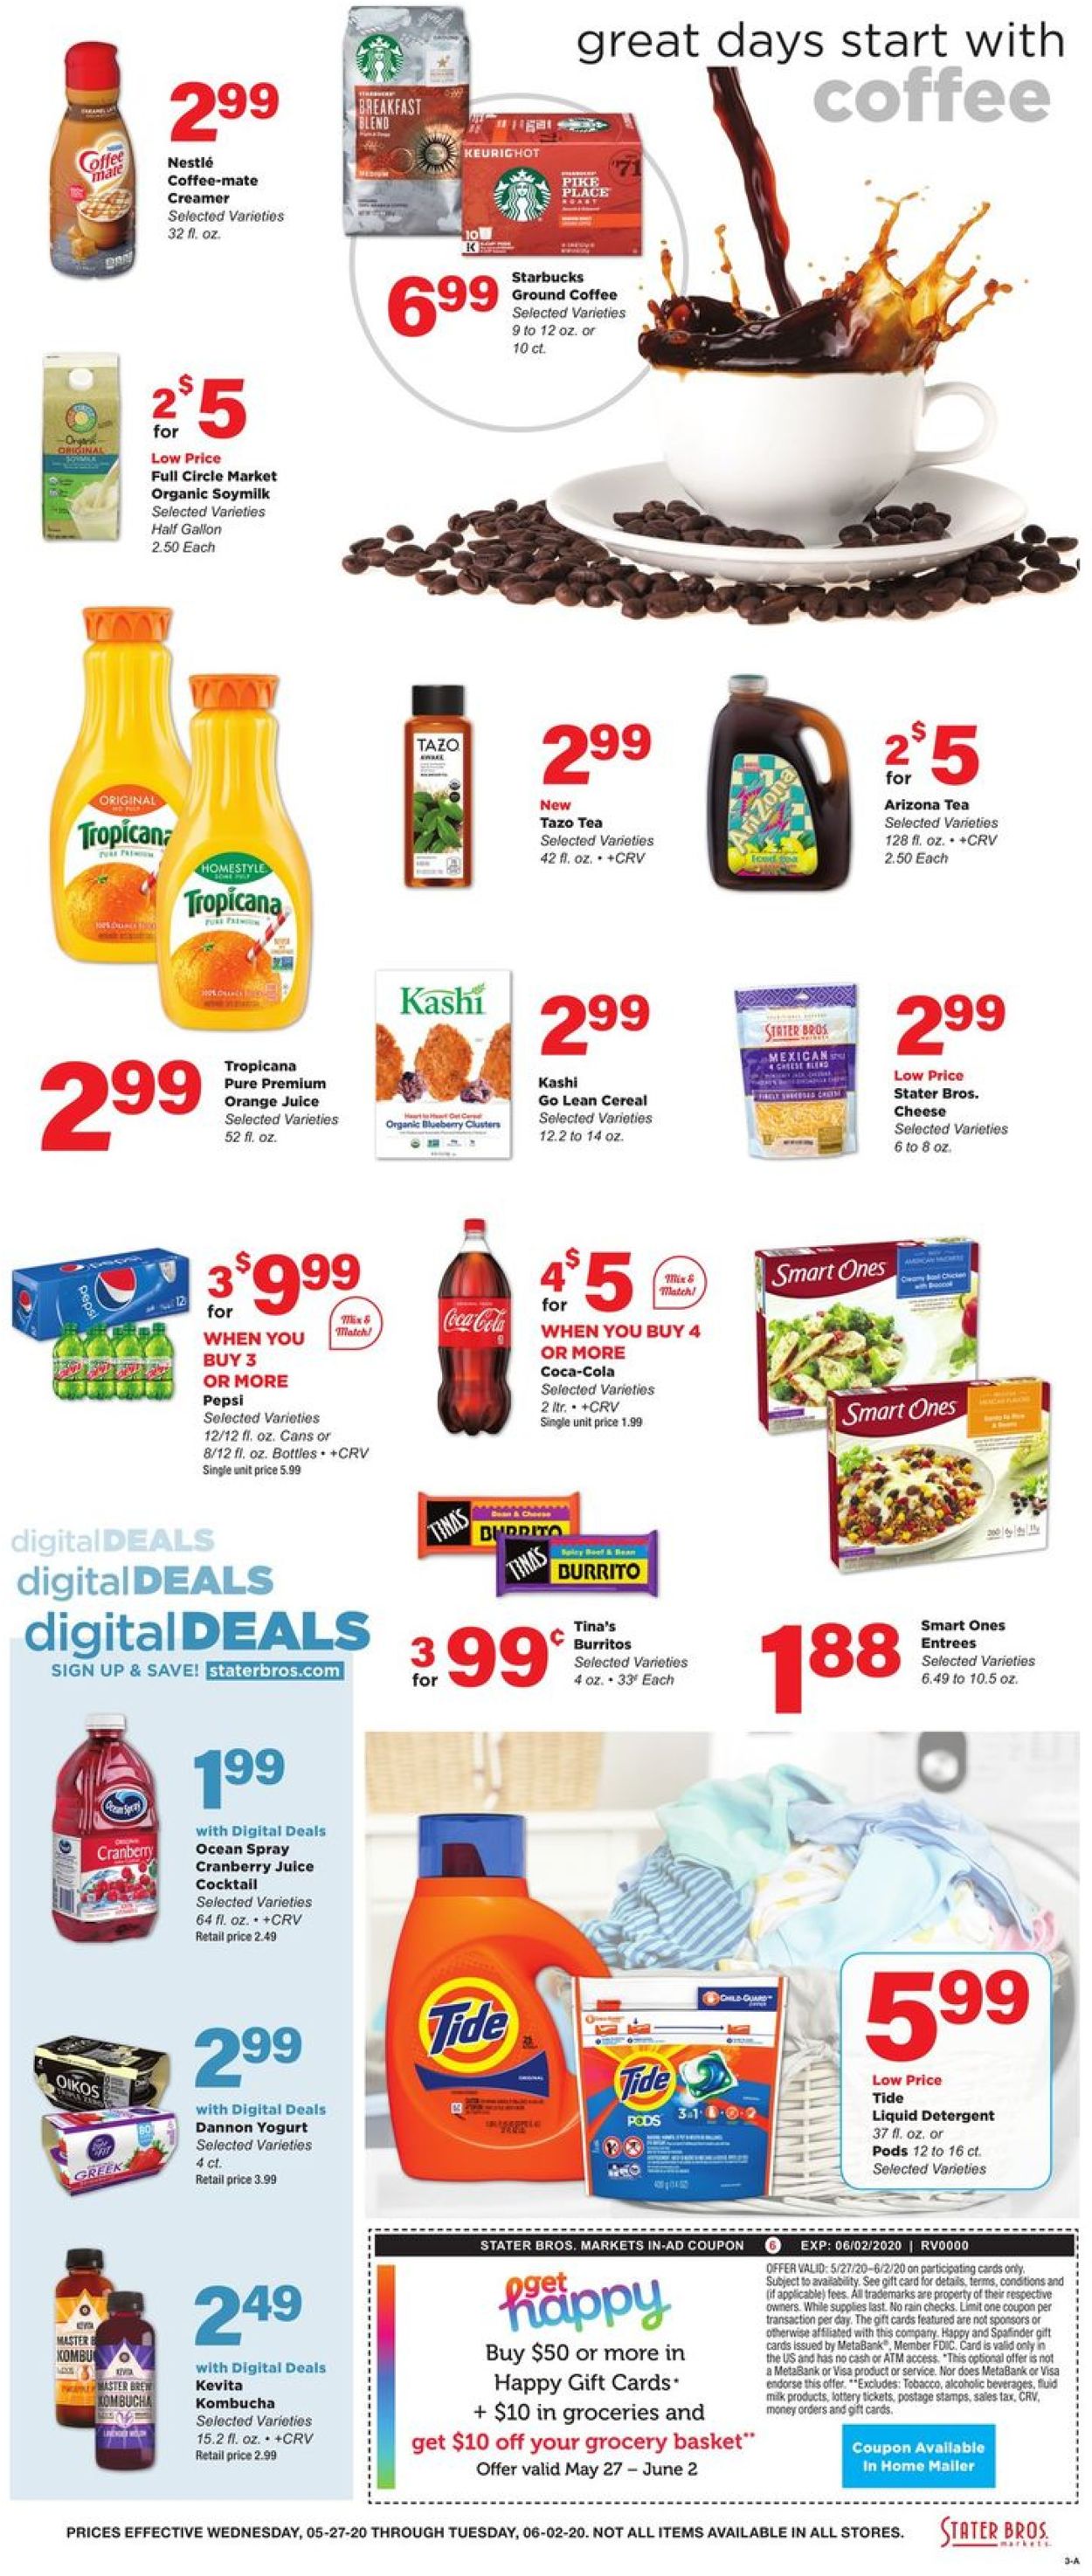 Stater Bros. Ad from 05/27/2020